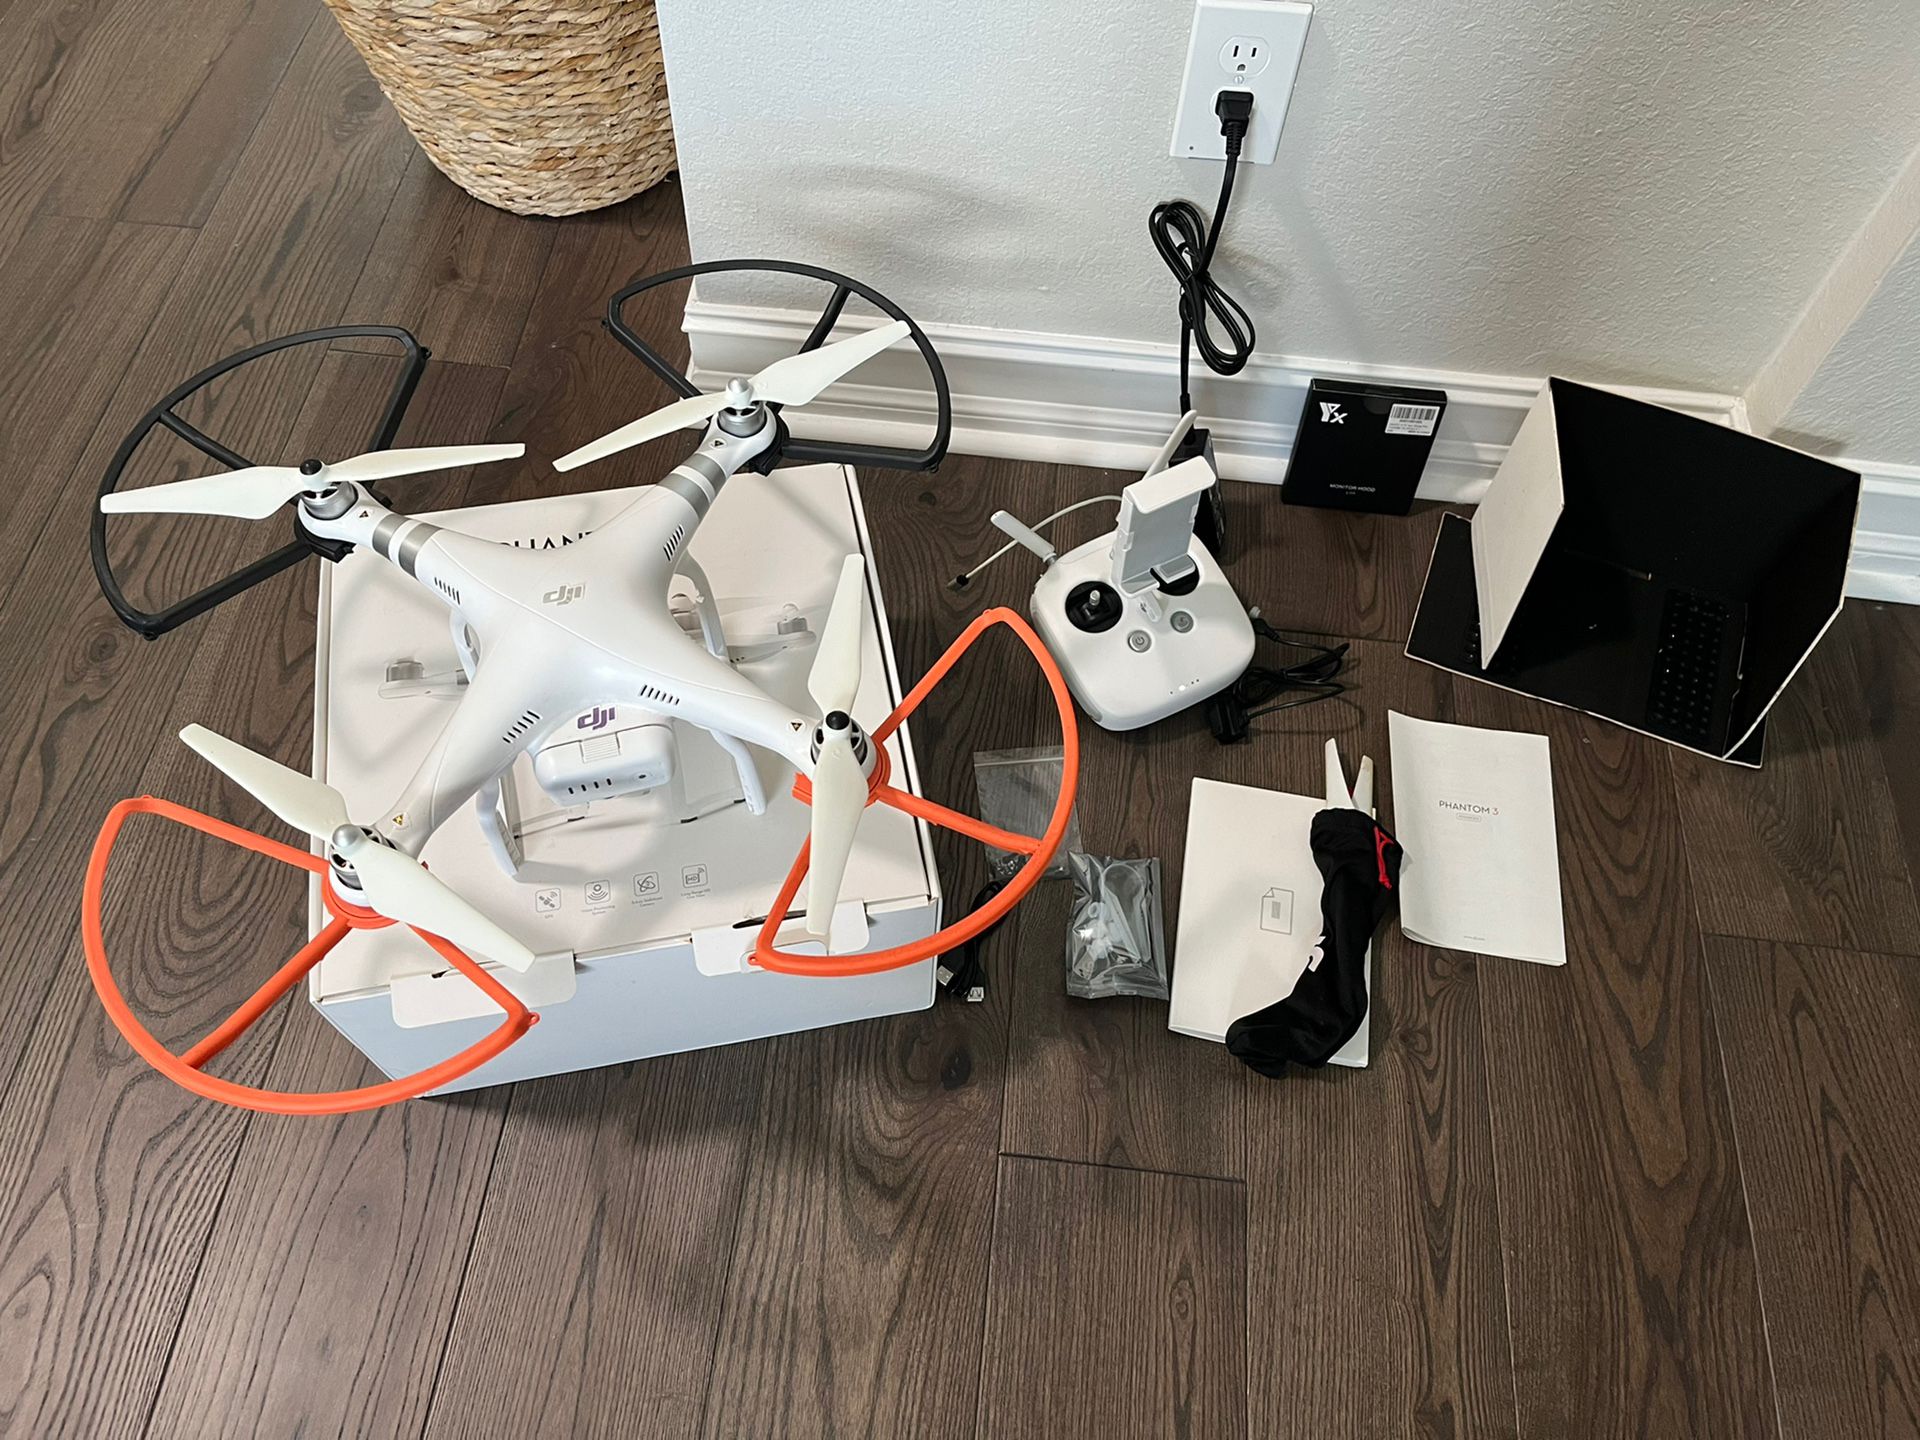 Vedhæft til Teasing generation DJI Phantom 3 Advanced + Accessories READY TO FLY for Sale in Fort Myers  Beach, FL - OfferUp